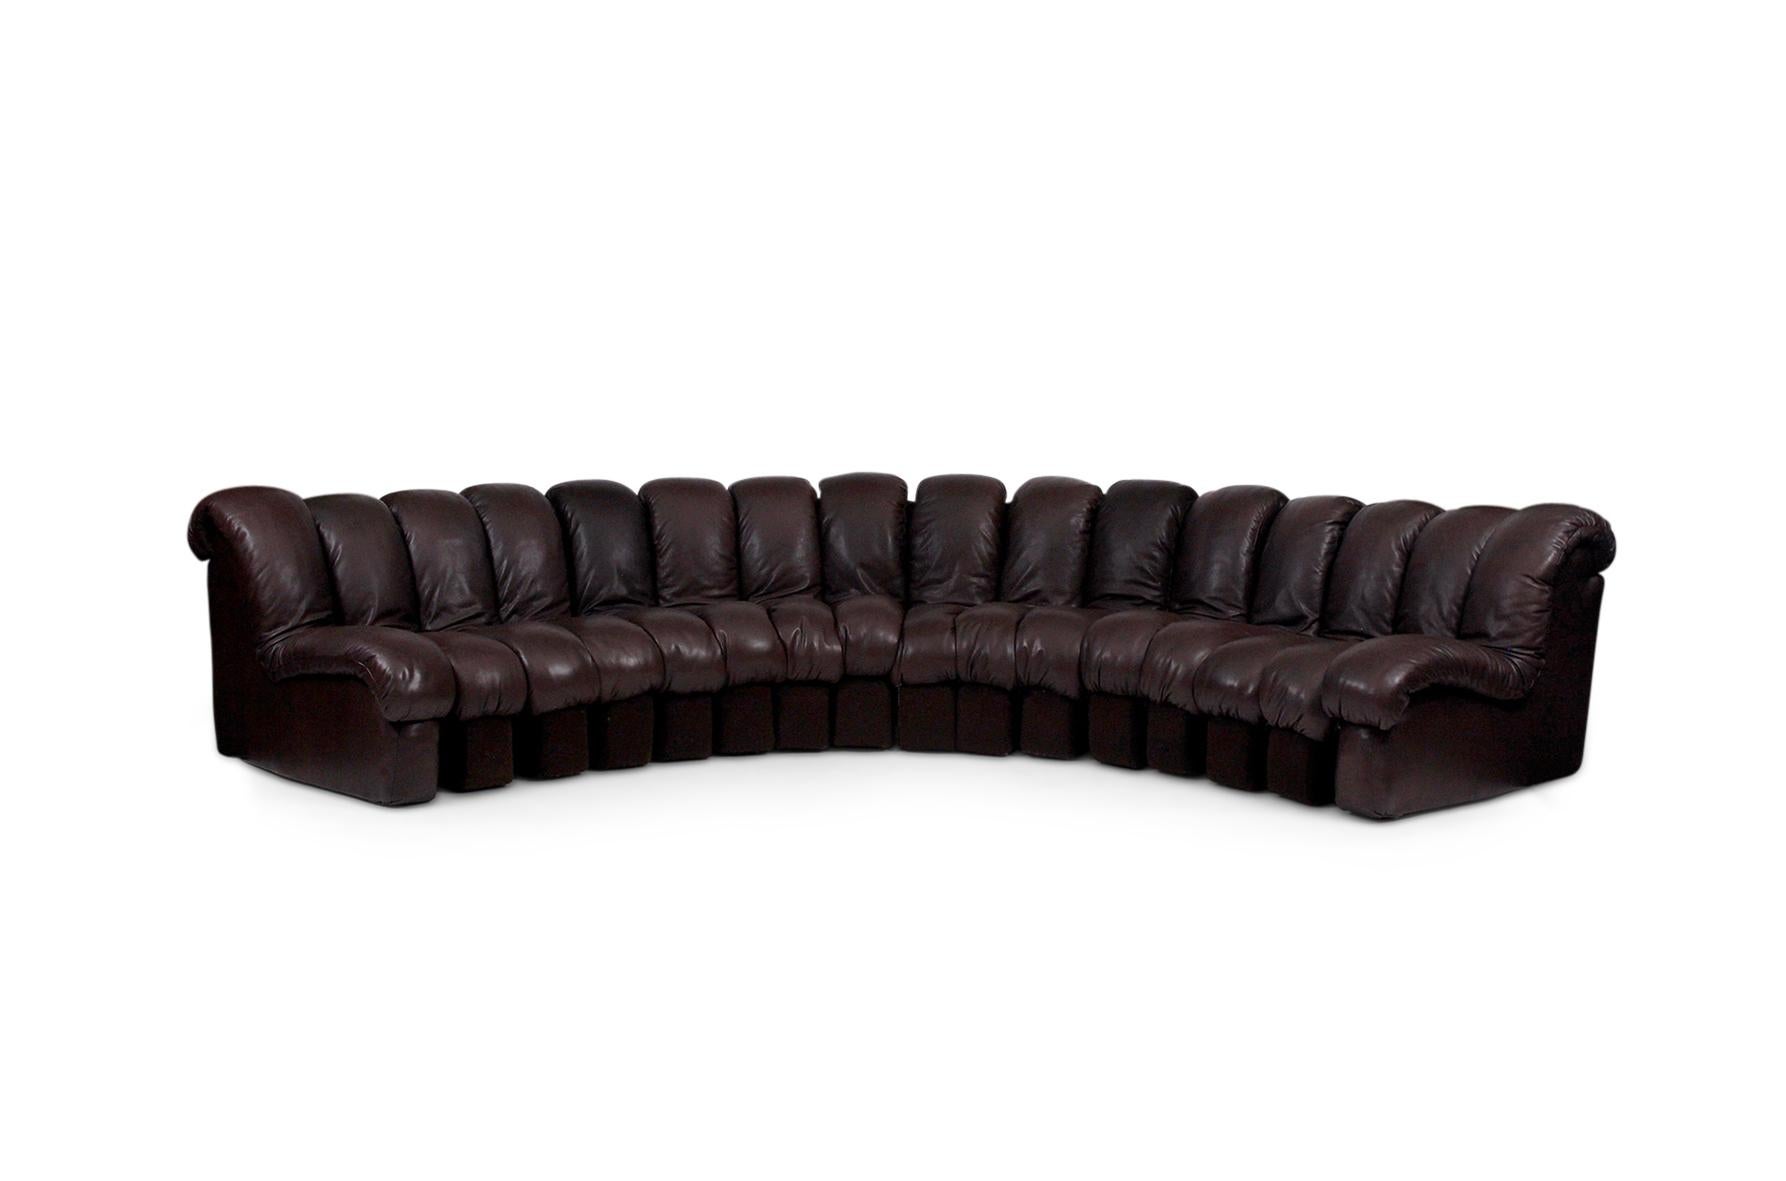 16-Section curved modular sofa in chocolate brown leather. 14 center sections plus two armrests. Each piece is connected by a flexible joint that allows for the shape of the sofa to be manipulated into a variety of curves to fit the specific needs